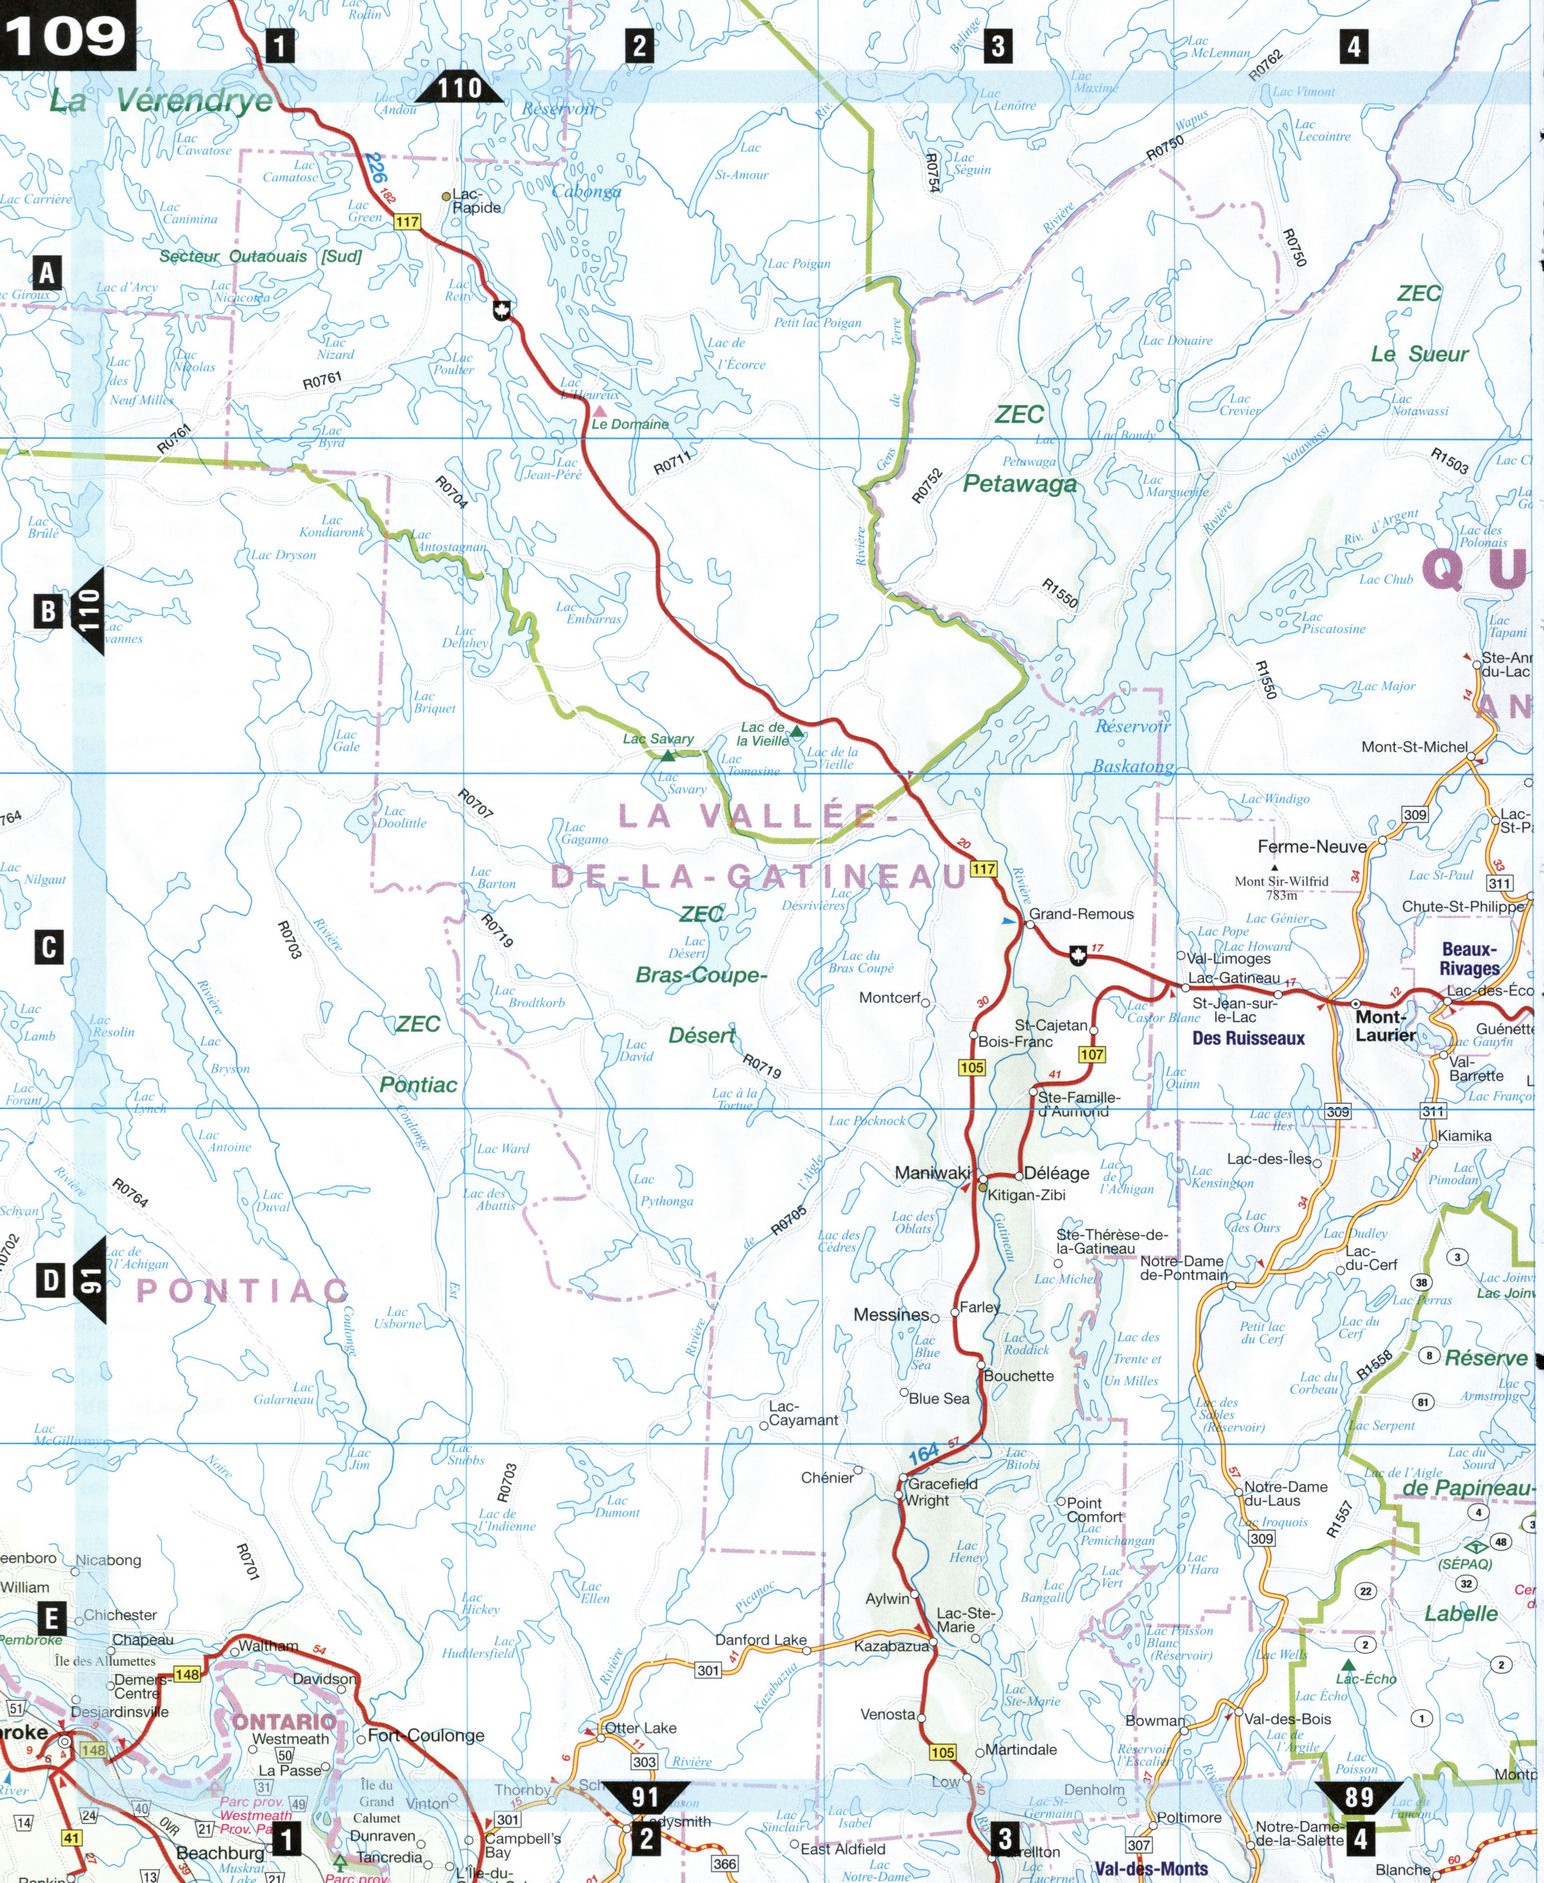 map of the highway and local roads of Upper Laurentians